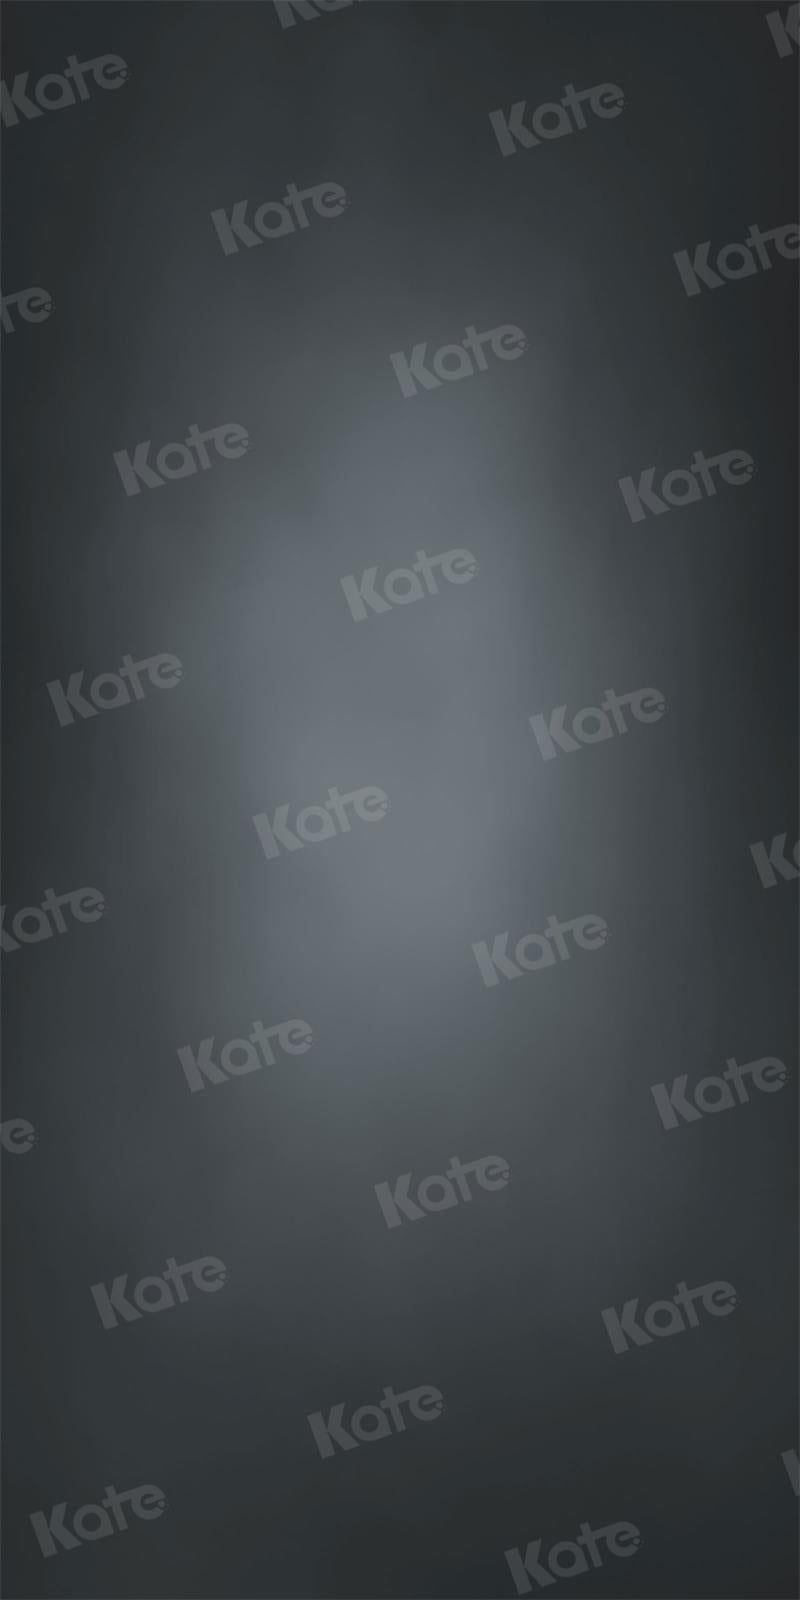 Kate Abstract Film Gray Backdrop for Photography